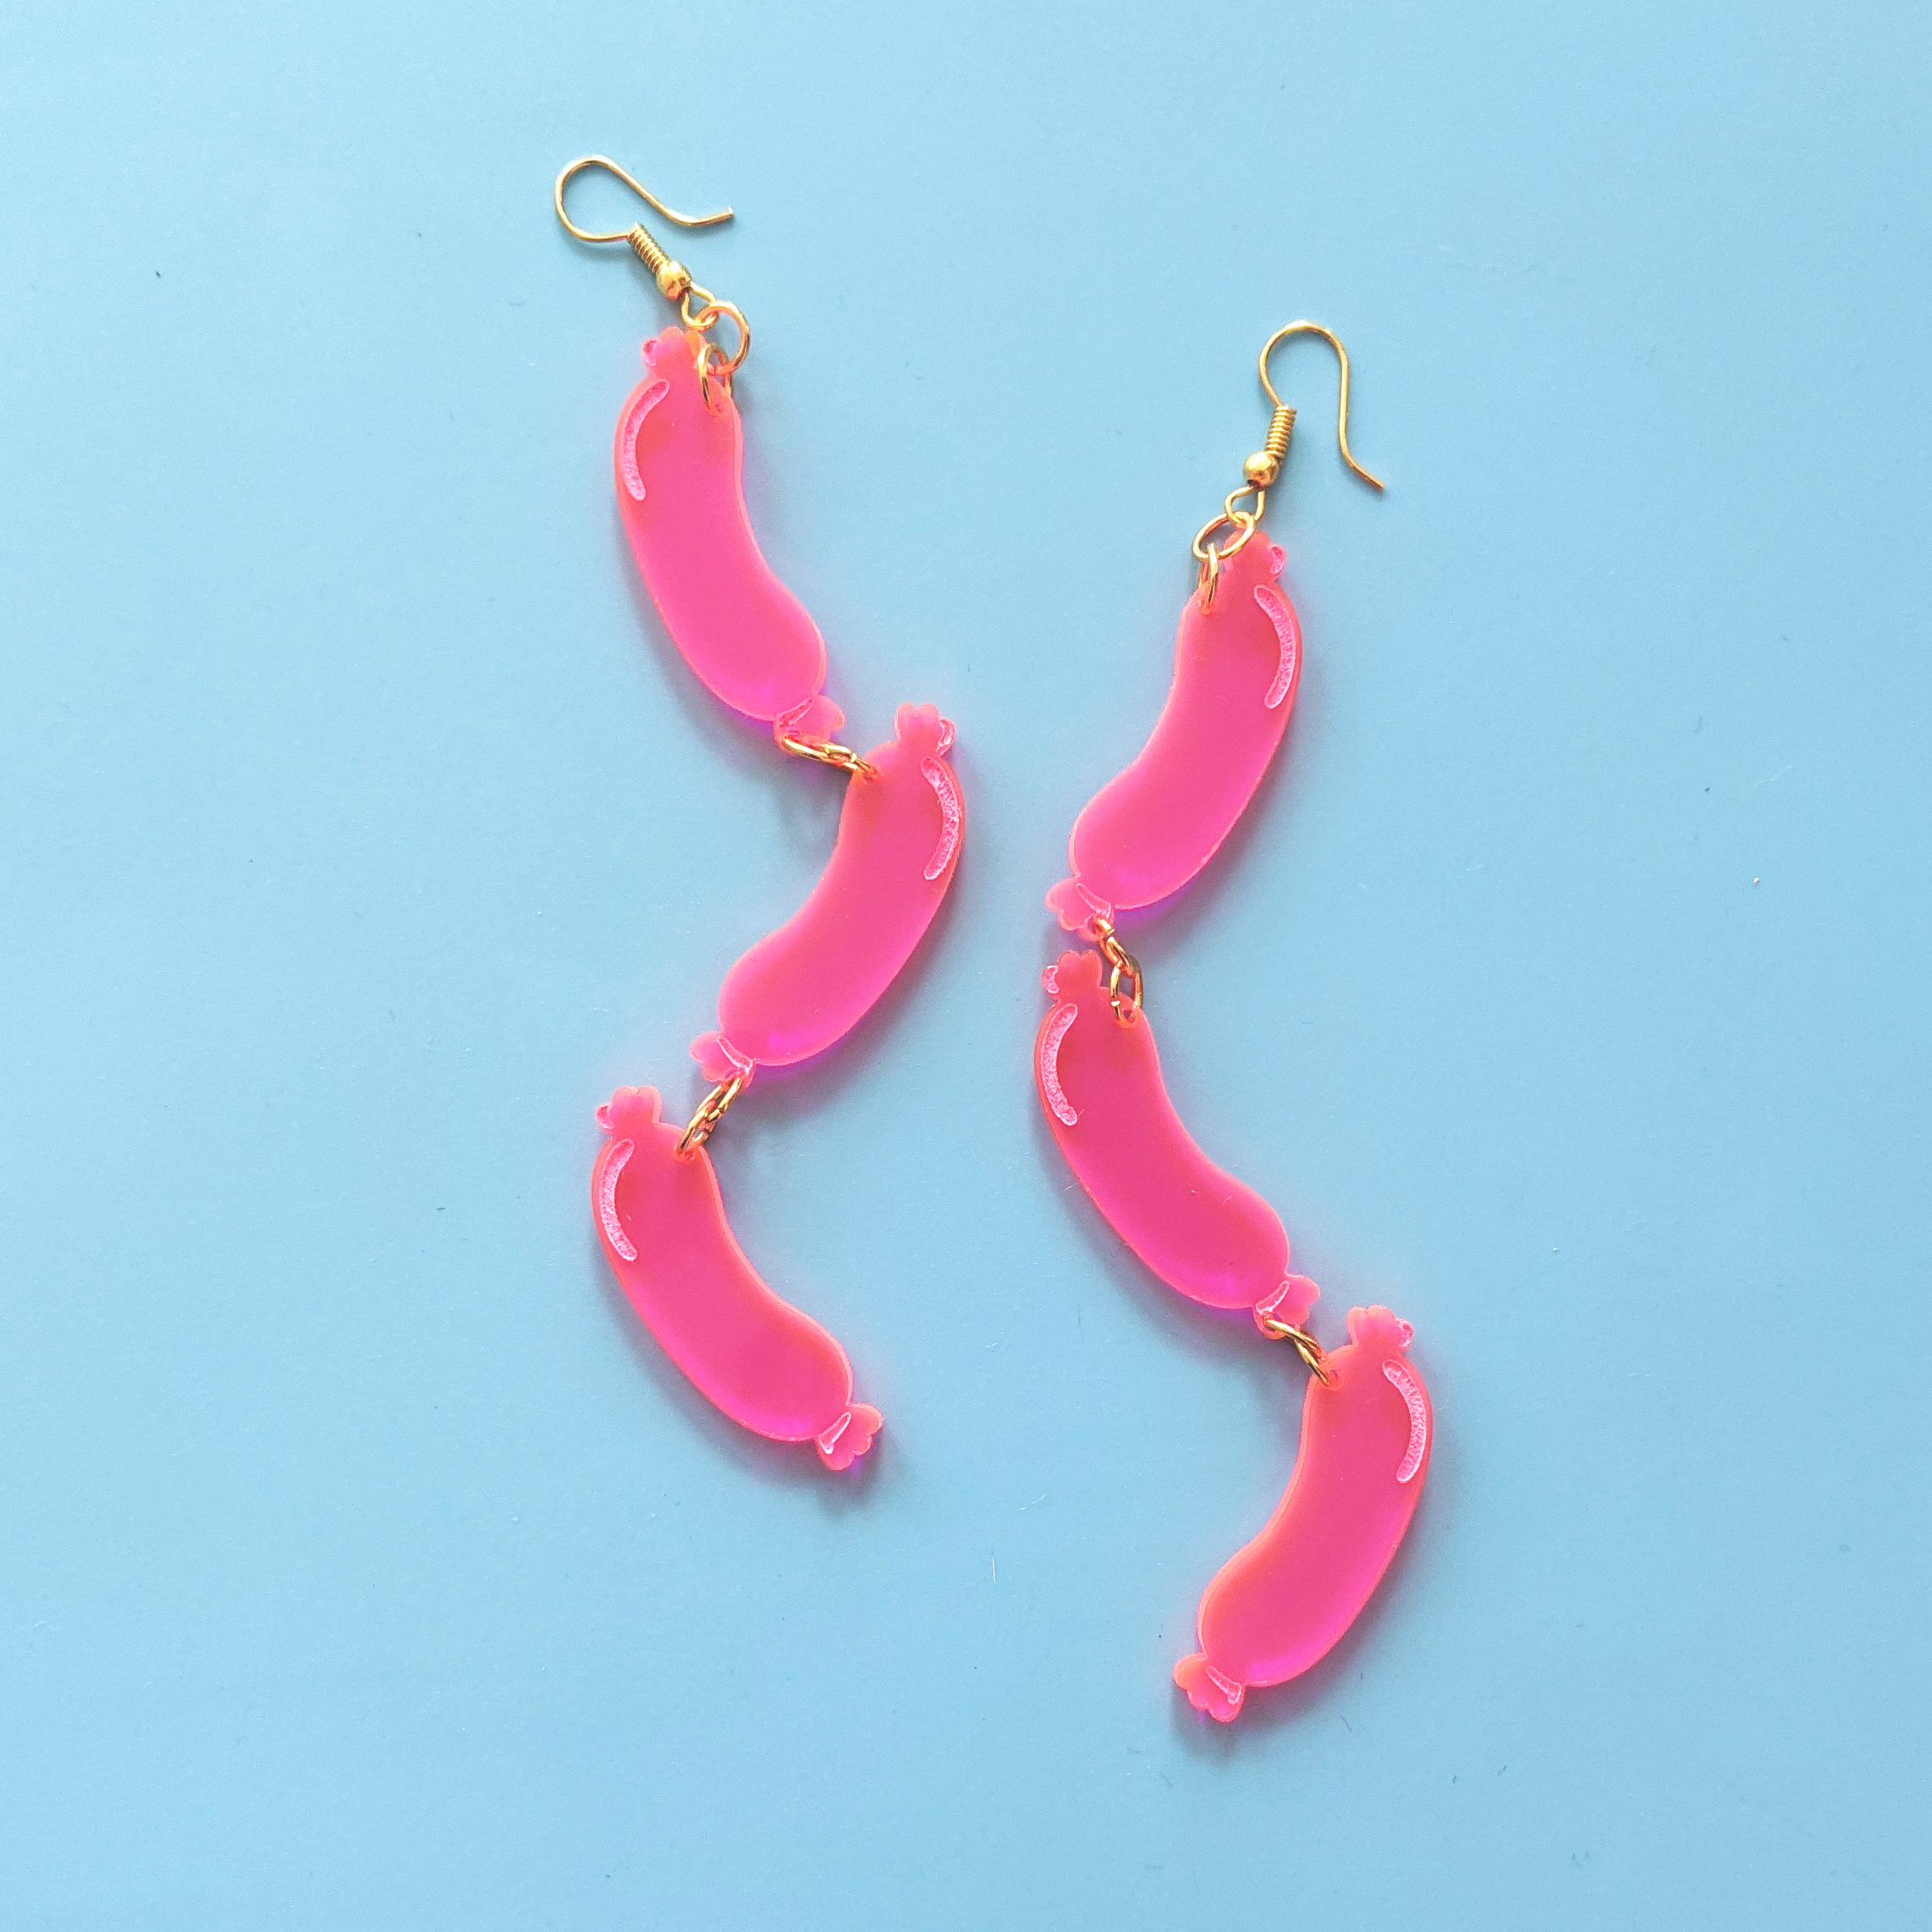 Sausage earrings - Fluorescent